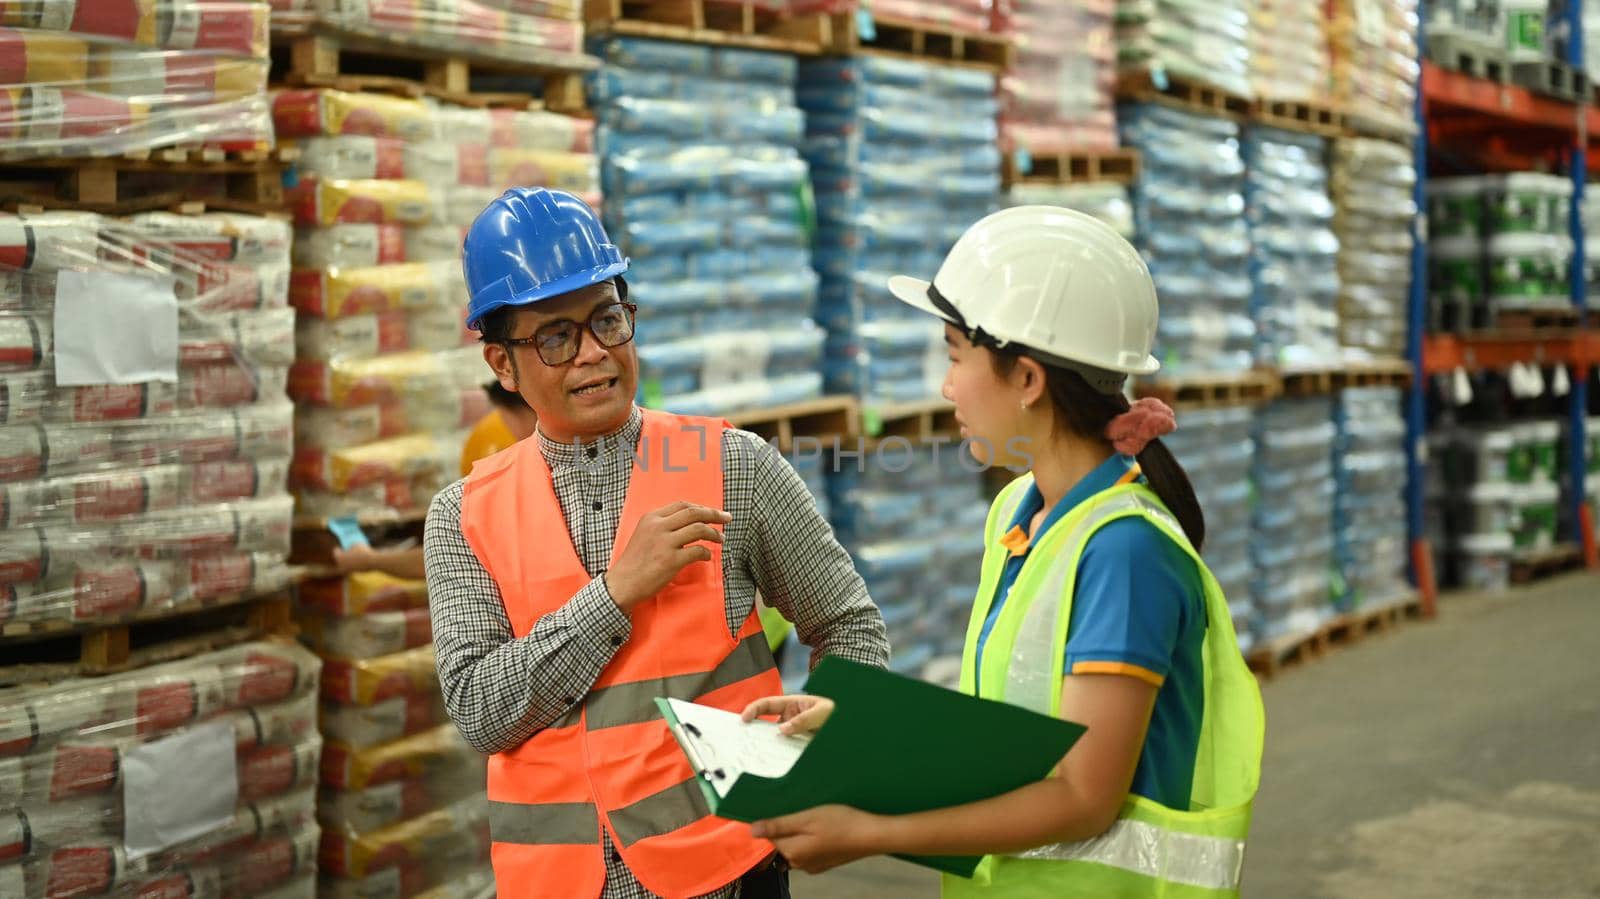 Senior male manager and young warehouse worker discussing work while walking in aisle between rows of tall shelves full of packed boxes.